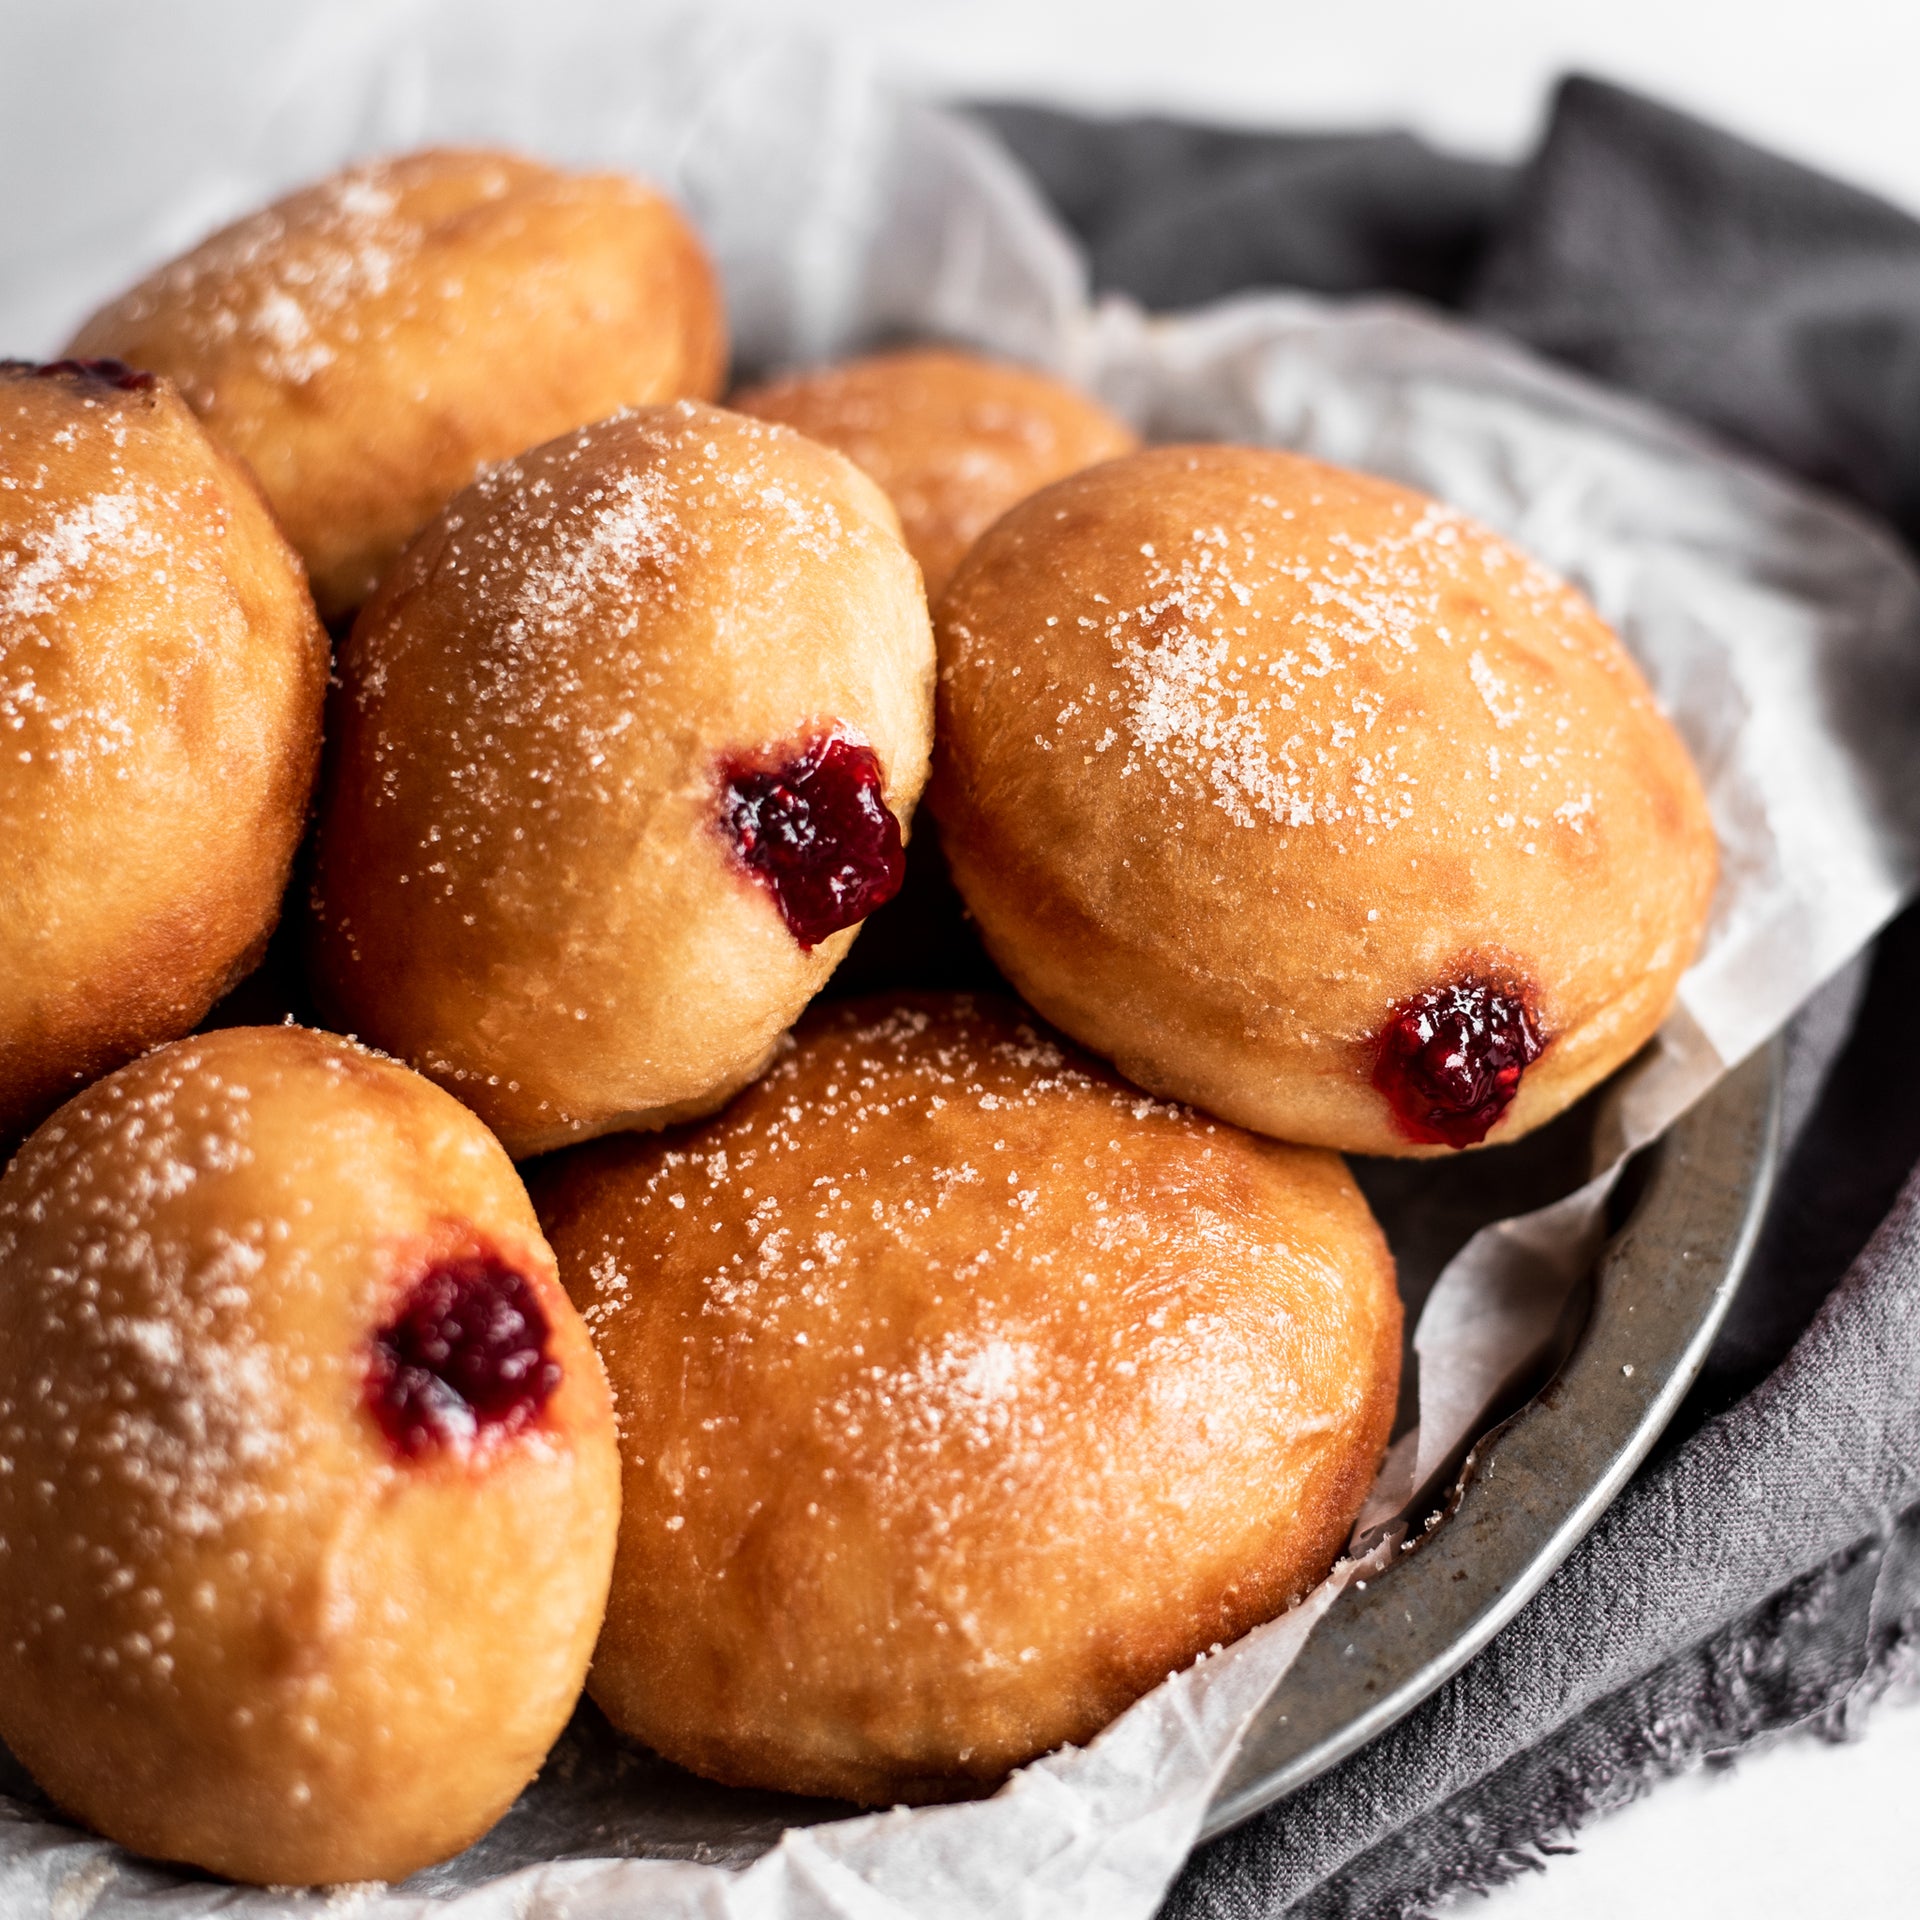 Jam doughnuts from Baking Mad